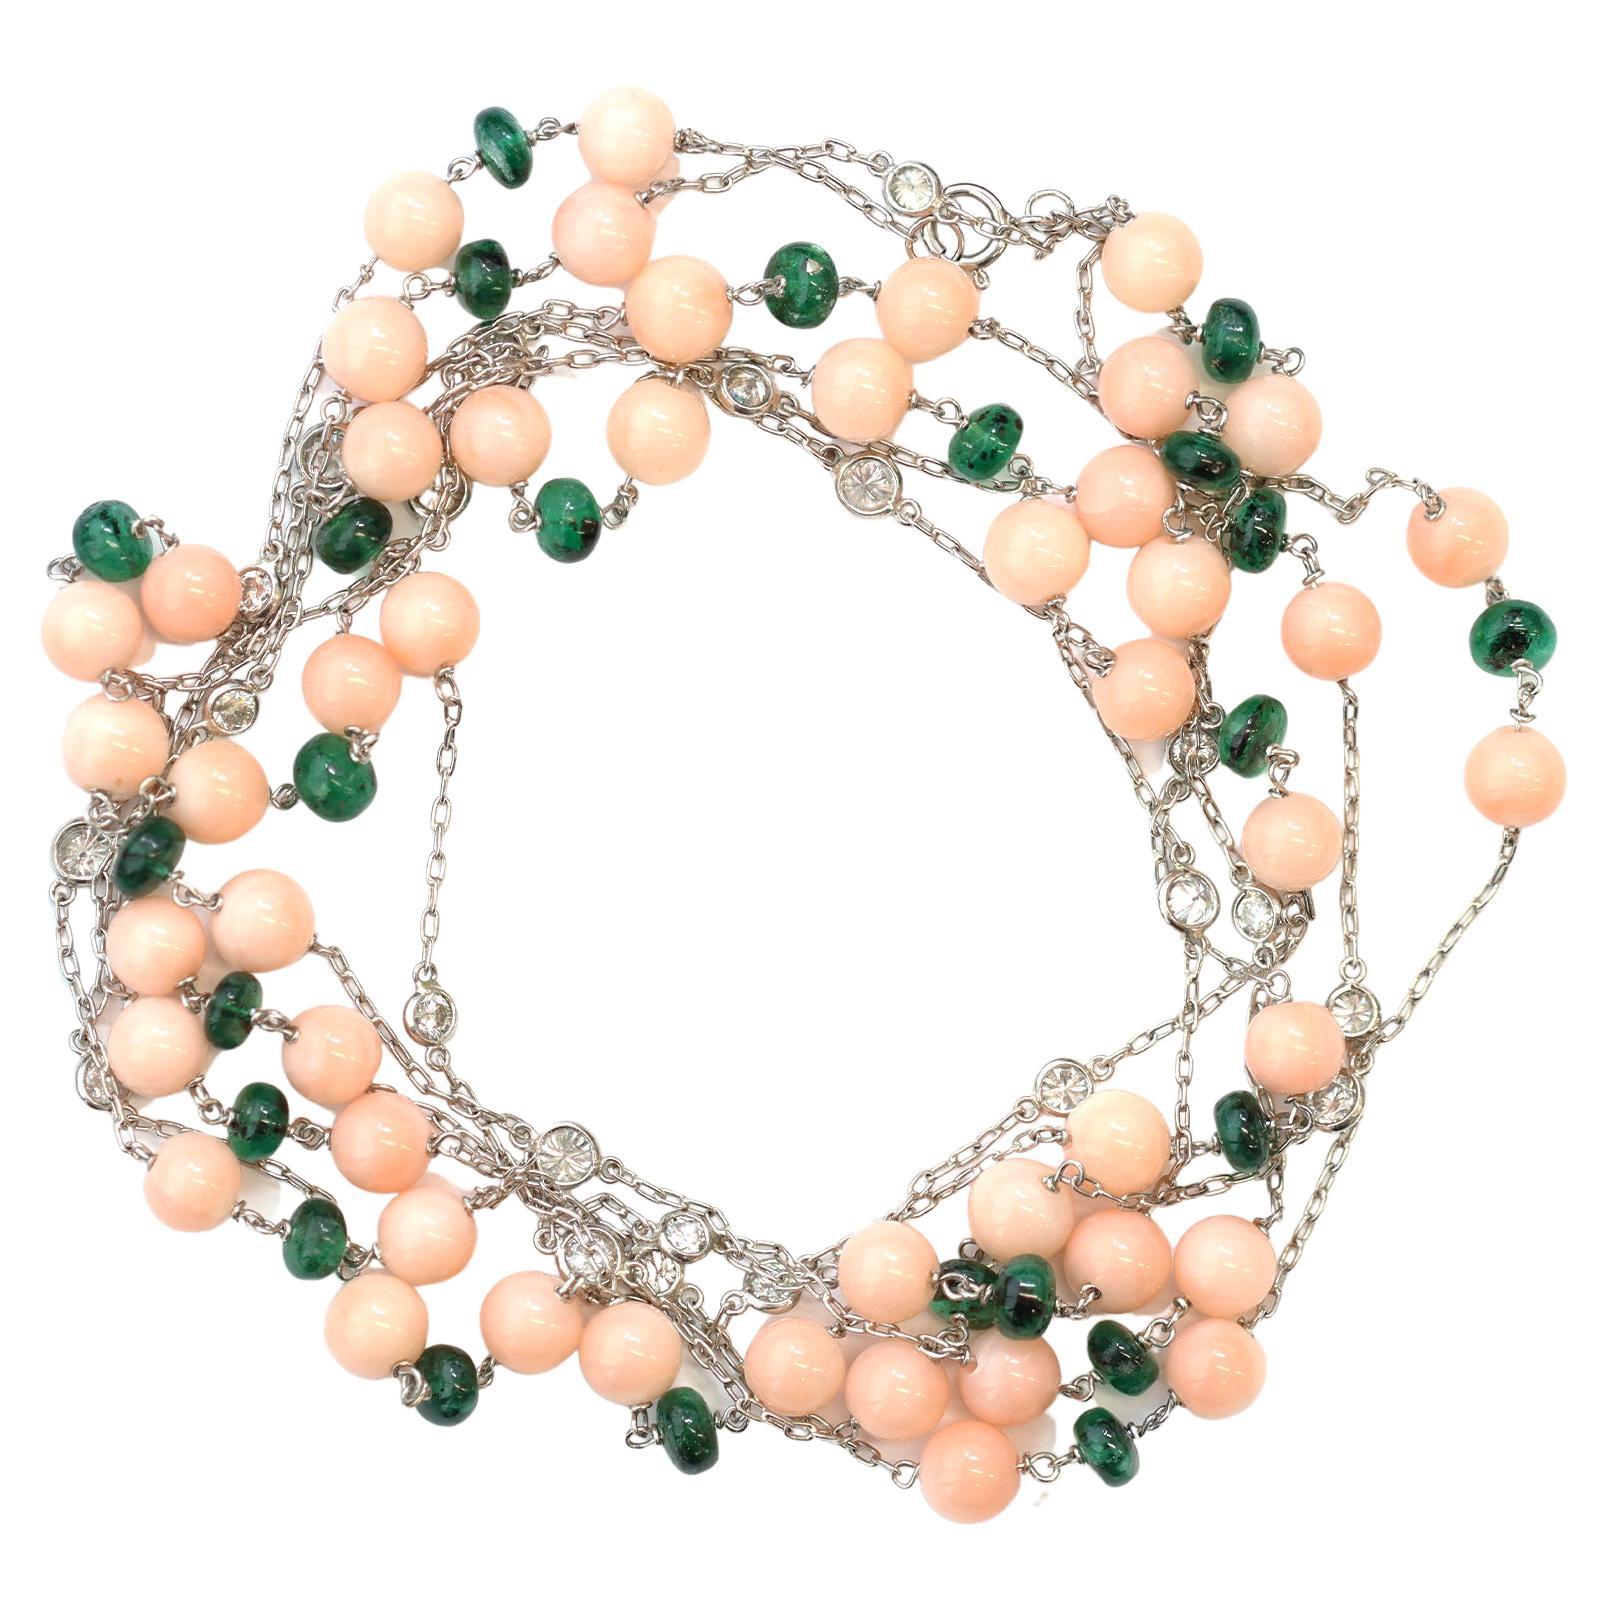 The long station necklace created by Rosaria Varra features natural untreated pink Angel-skin bead coral alternating with polished emerald bead and bezel set round diamonds. The estimated weight of the diamonds is 2.44 carats, GH color, and VS-SI